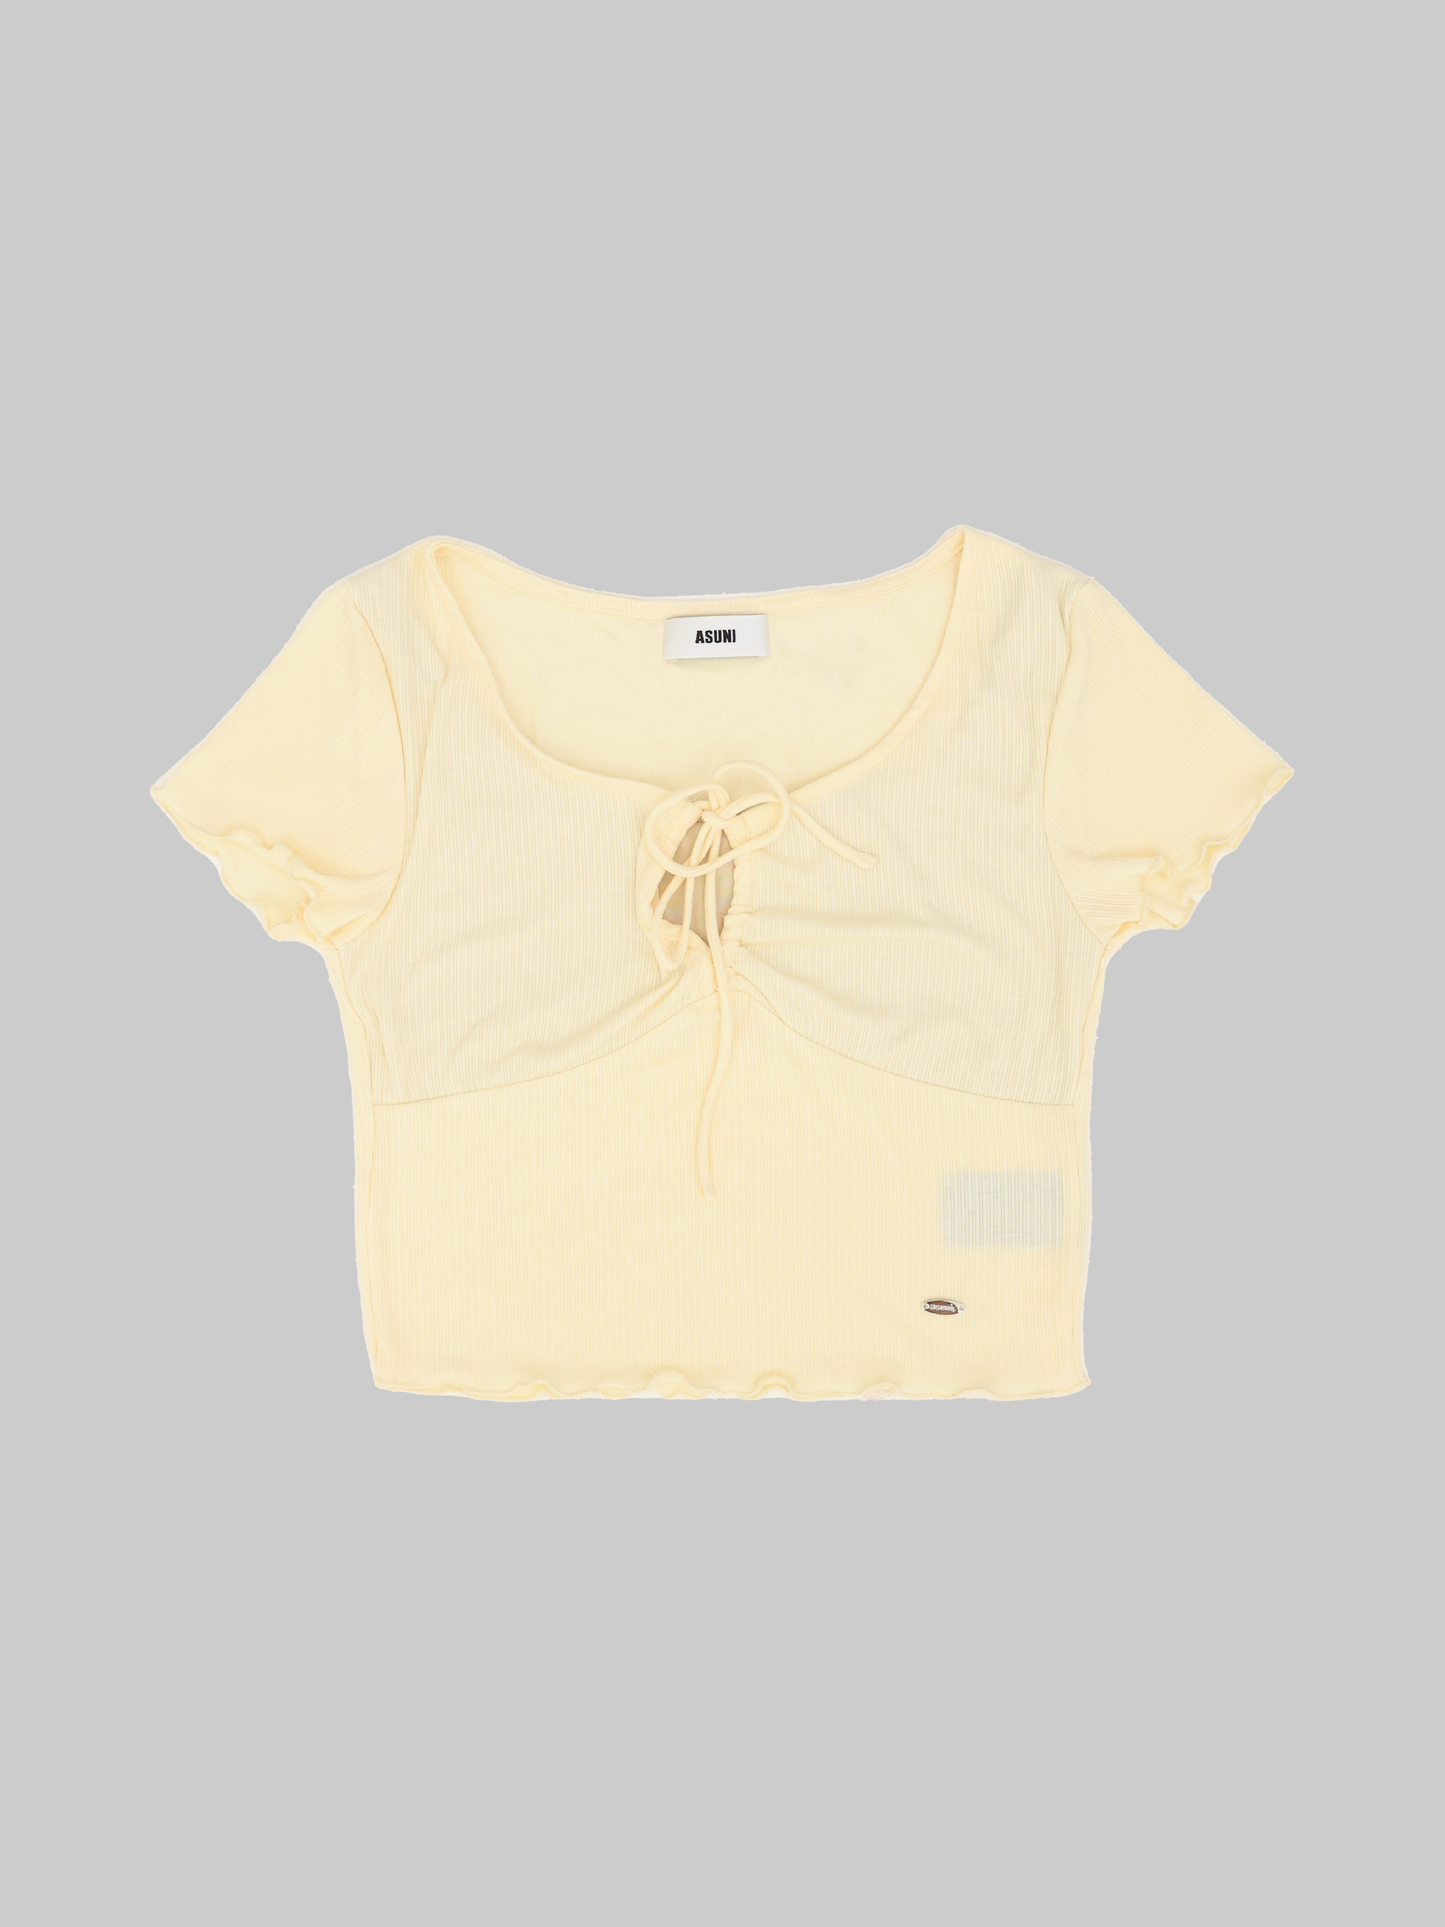 Pretty Lace Up Short Sleeve T-Shirt In Yellow/ Gray